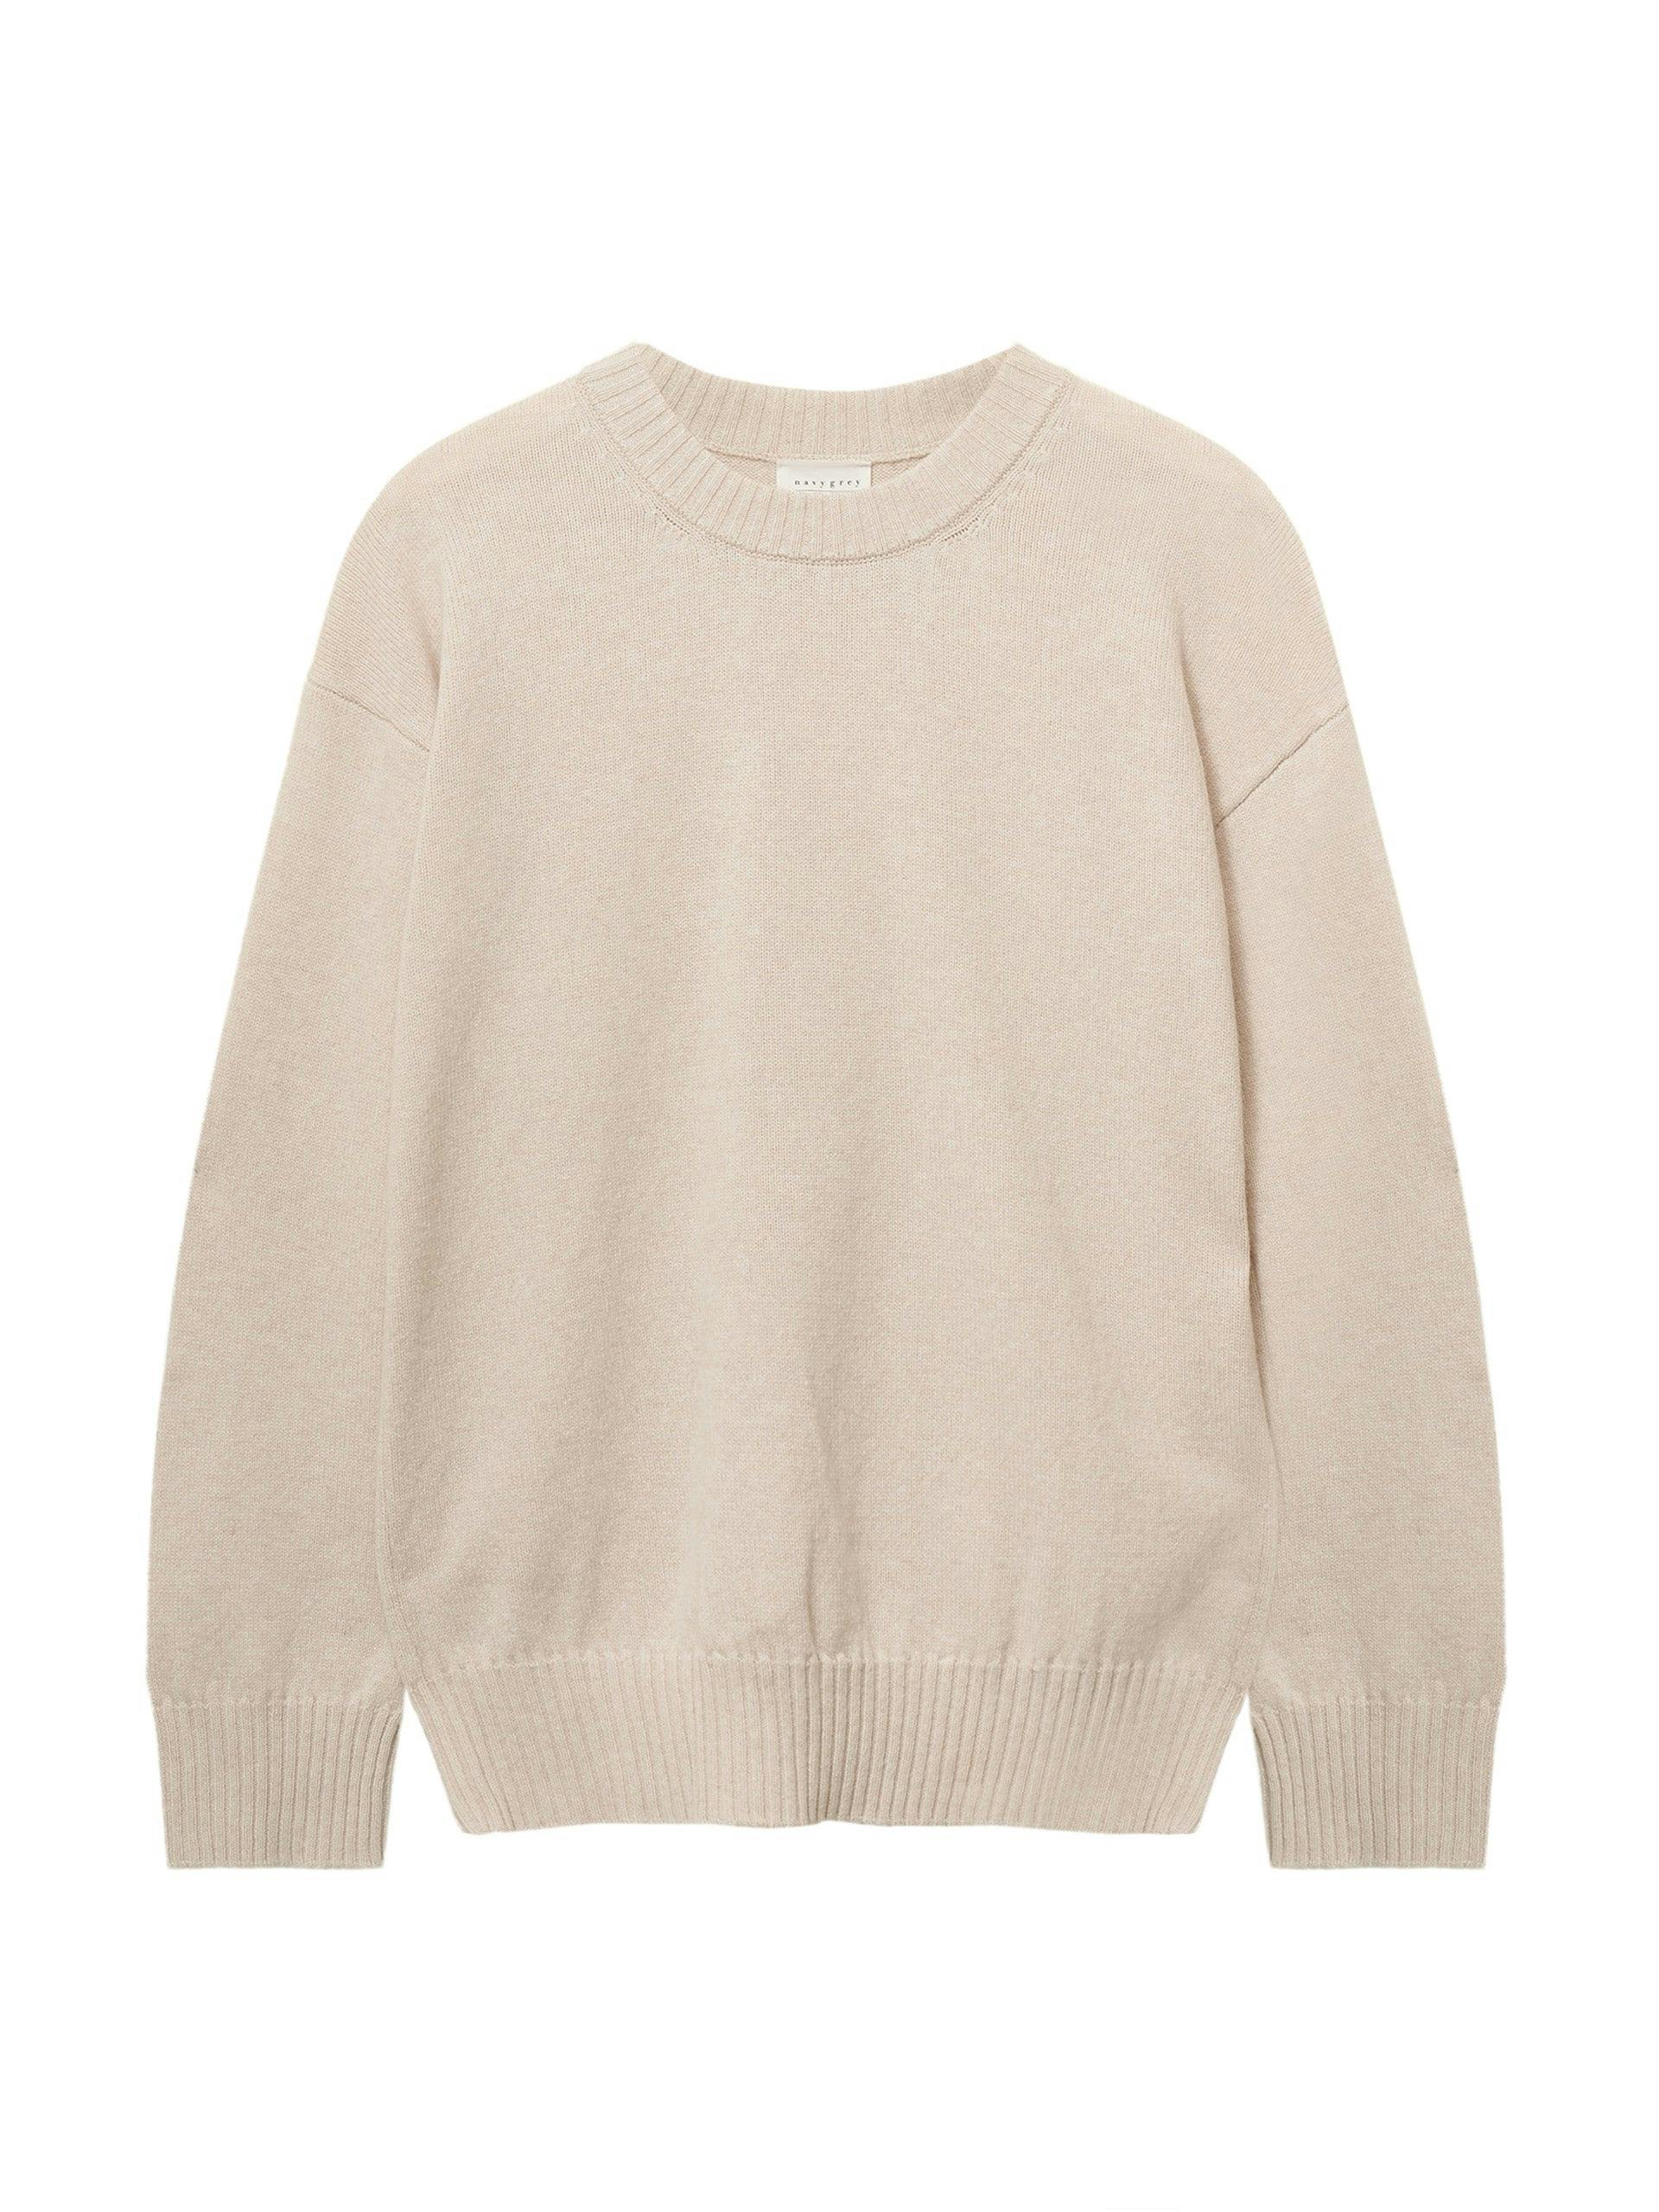 The Relaxed knit in lait